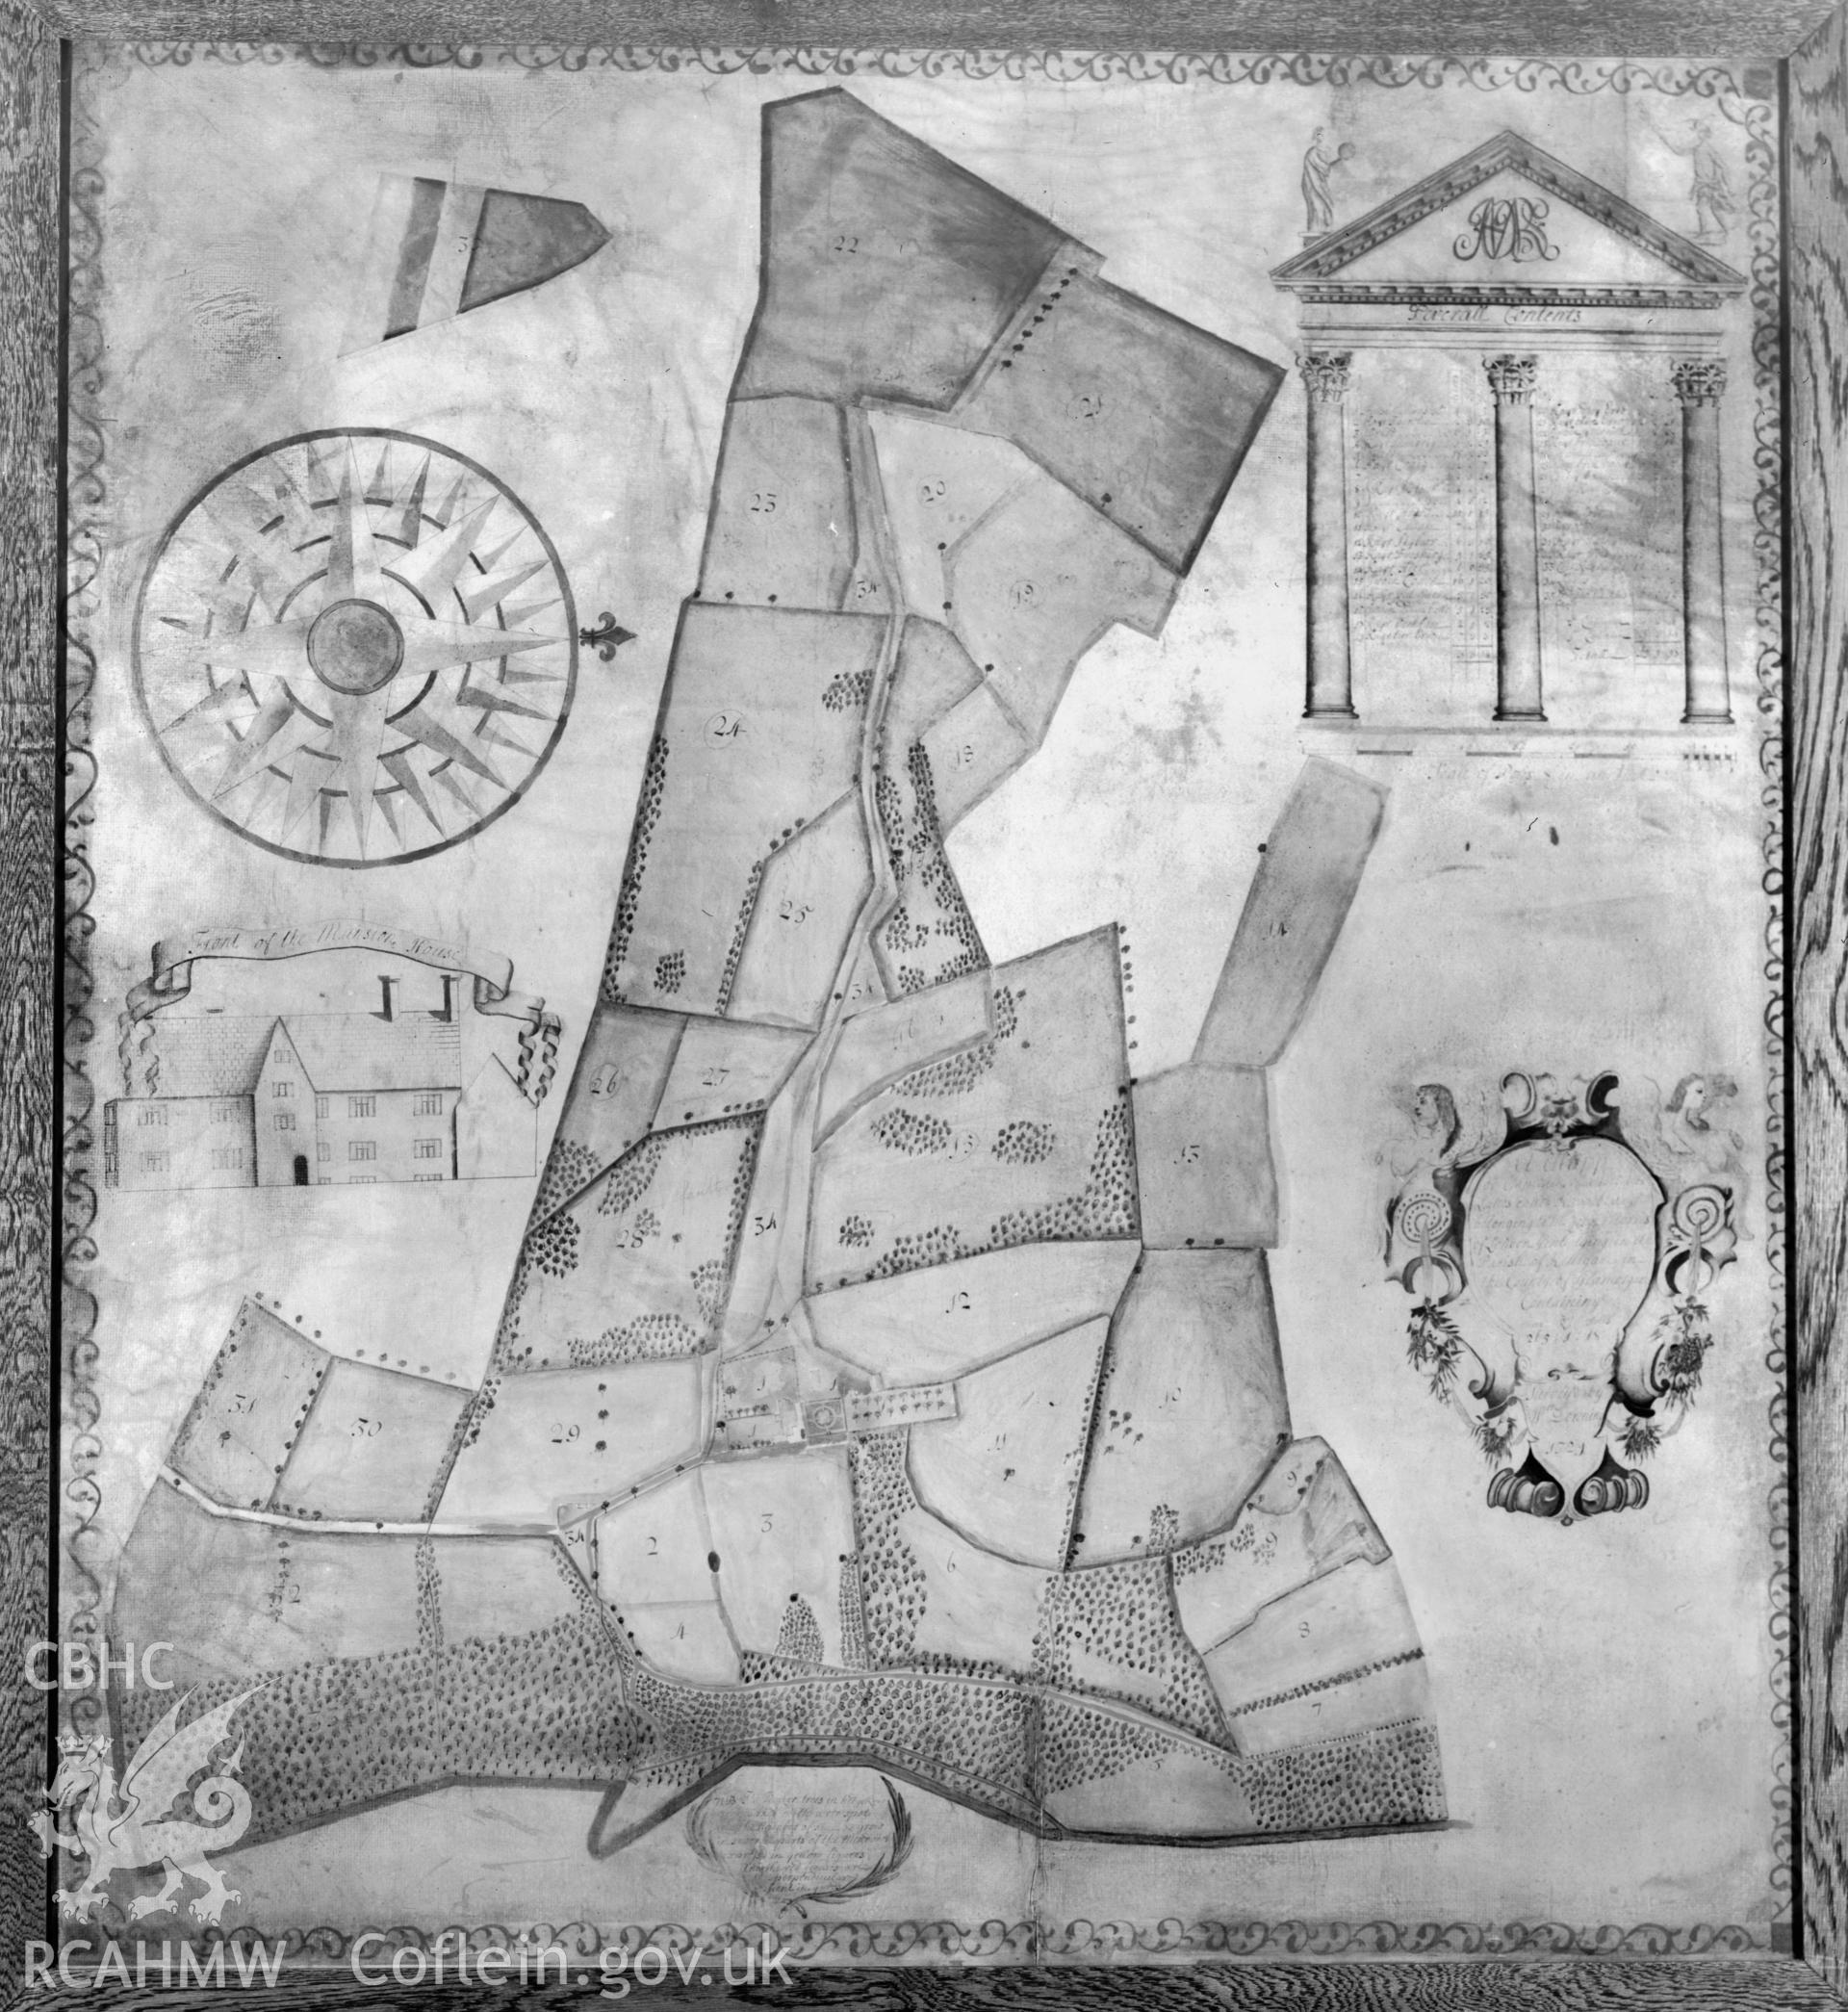 Black and white acetate negative showing 1729 estate map of Gilfach Fargoed Fawr.